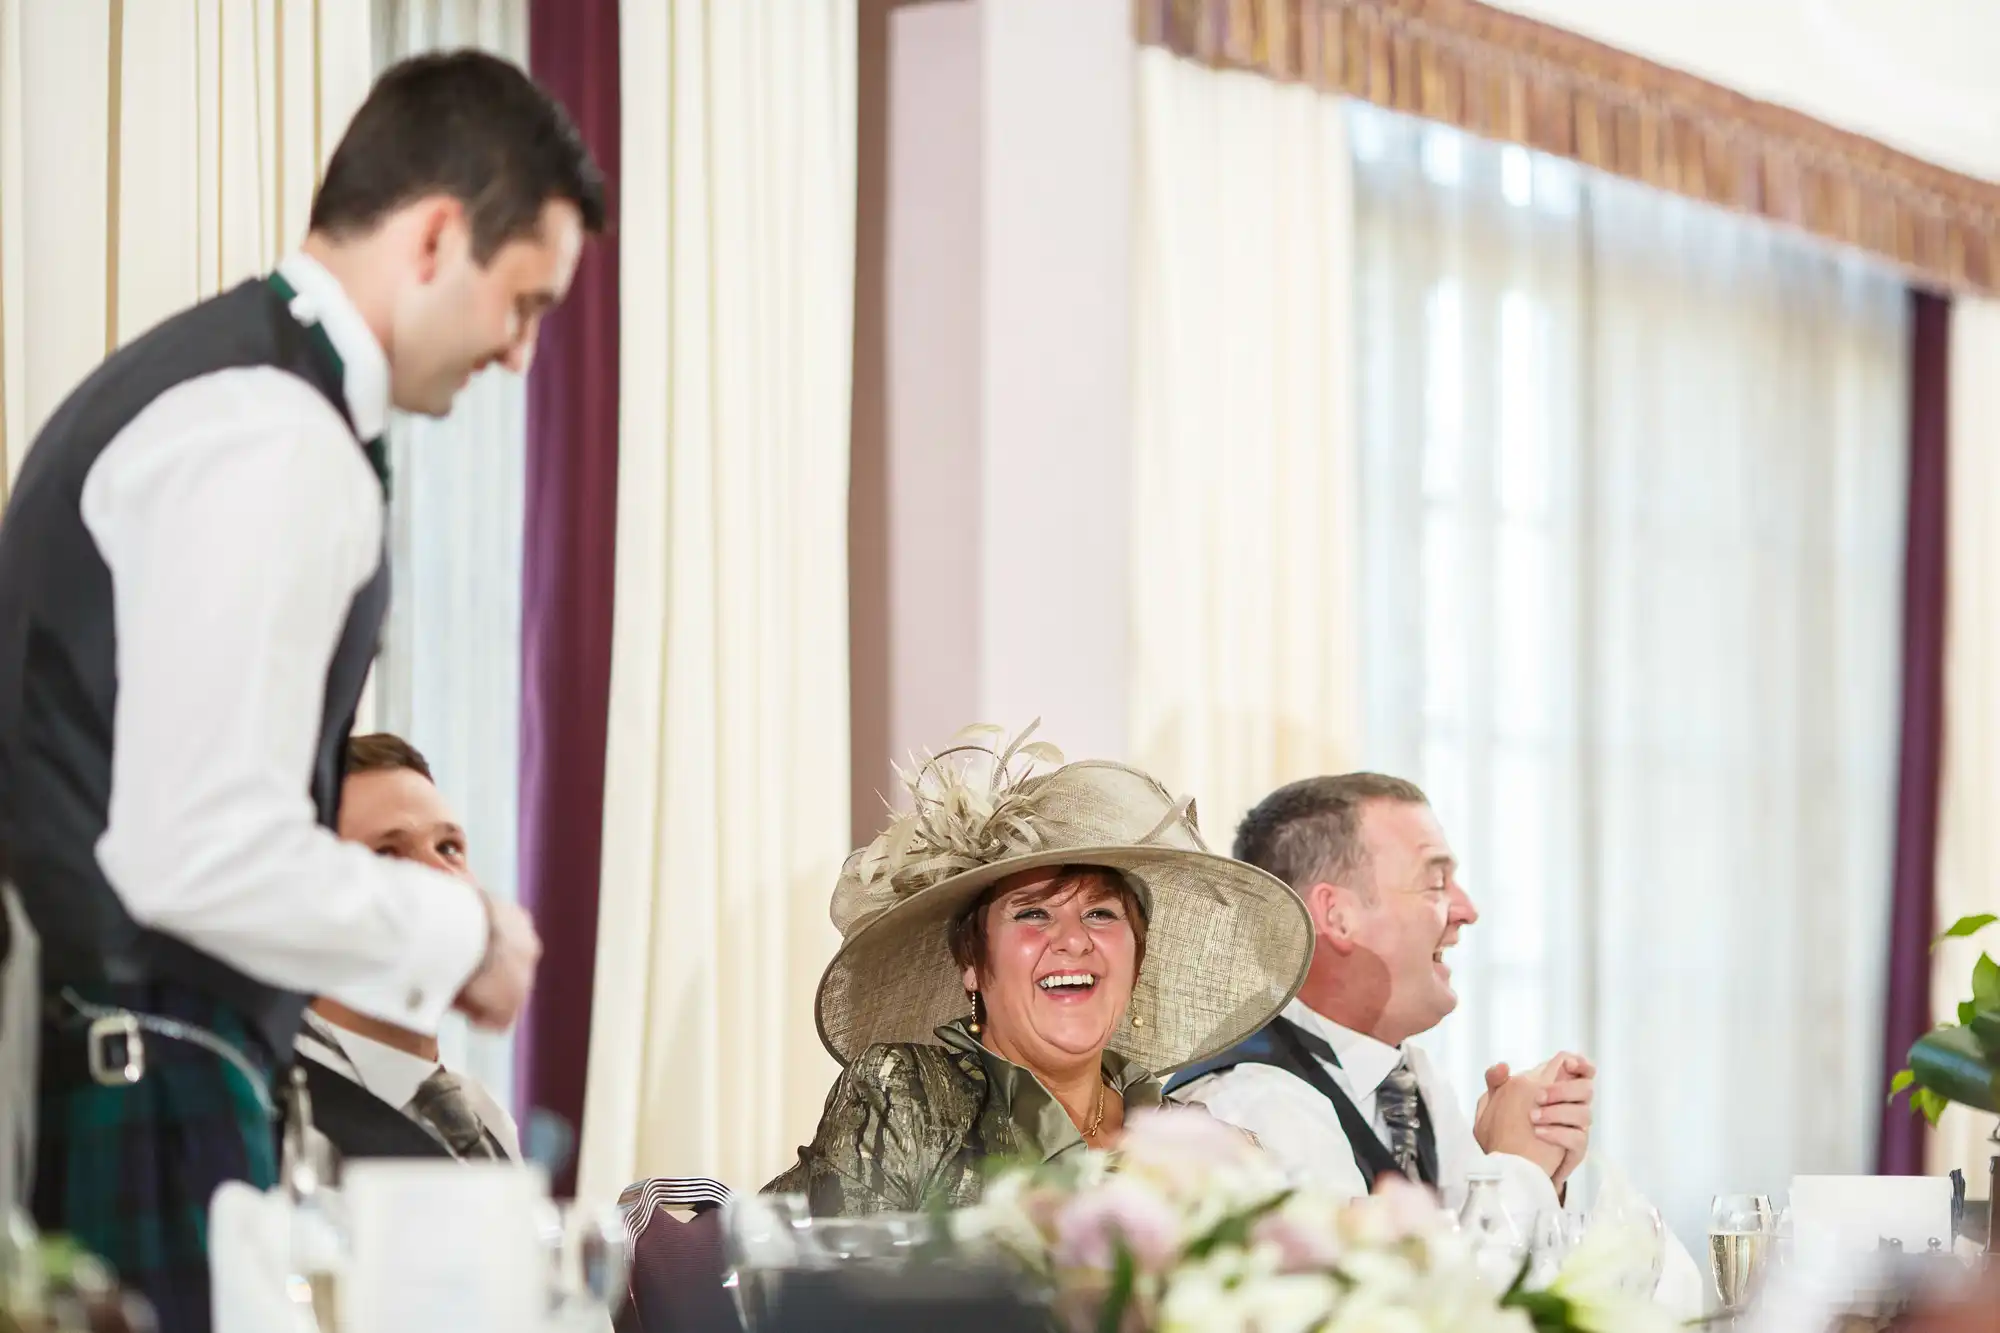 A woman in a large hat laughs joyfully at a formal dining event while a waiter serves and men in suits converse happily.